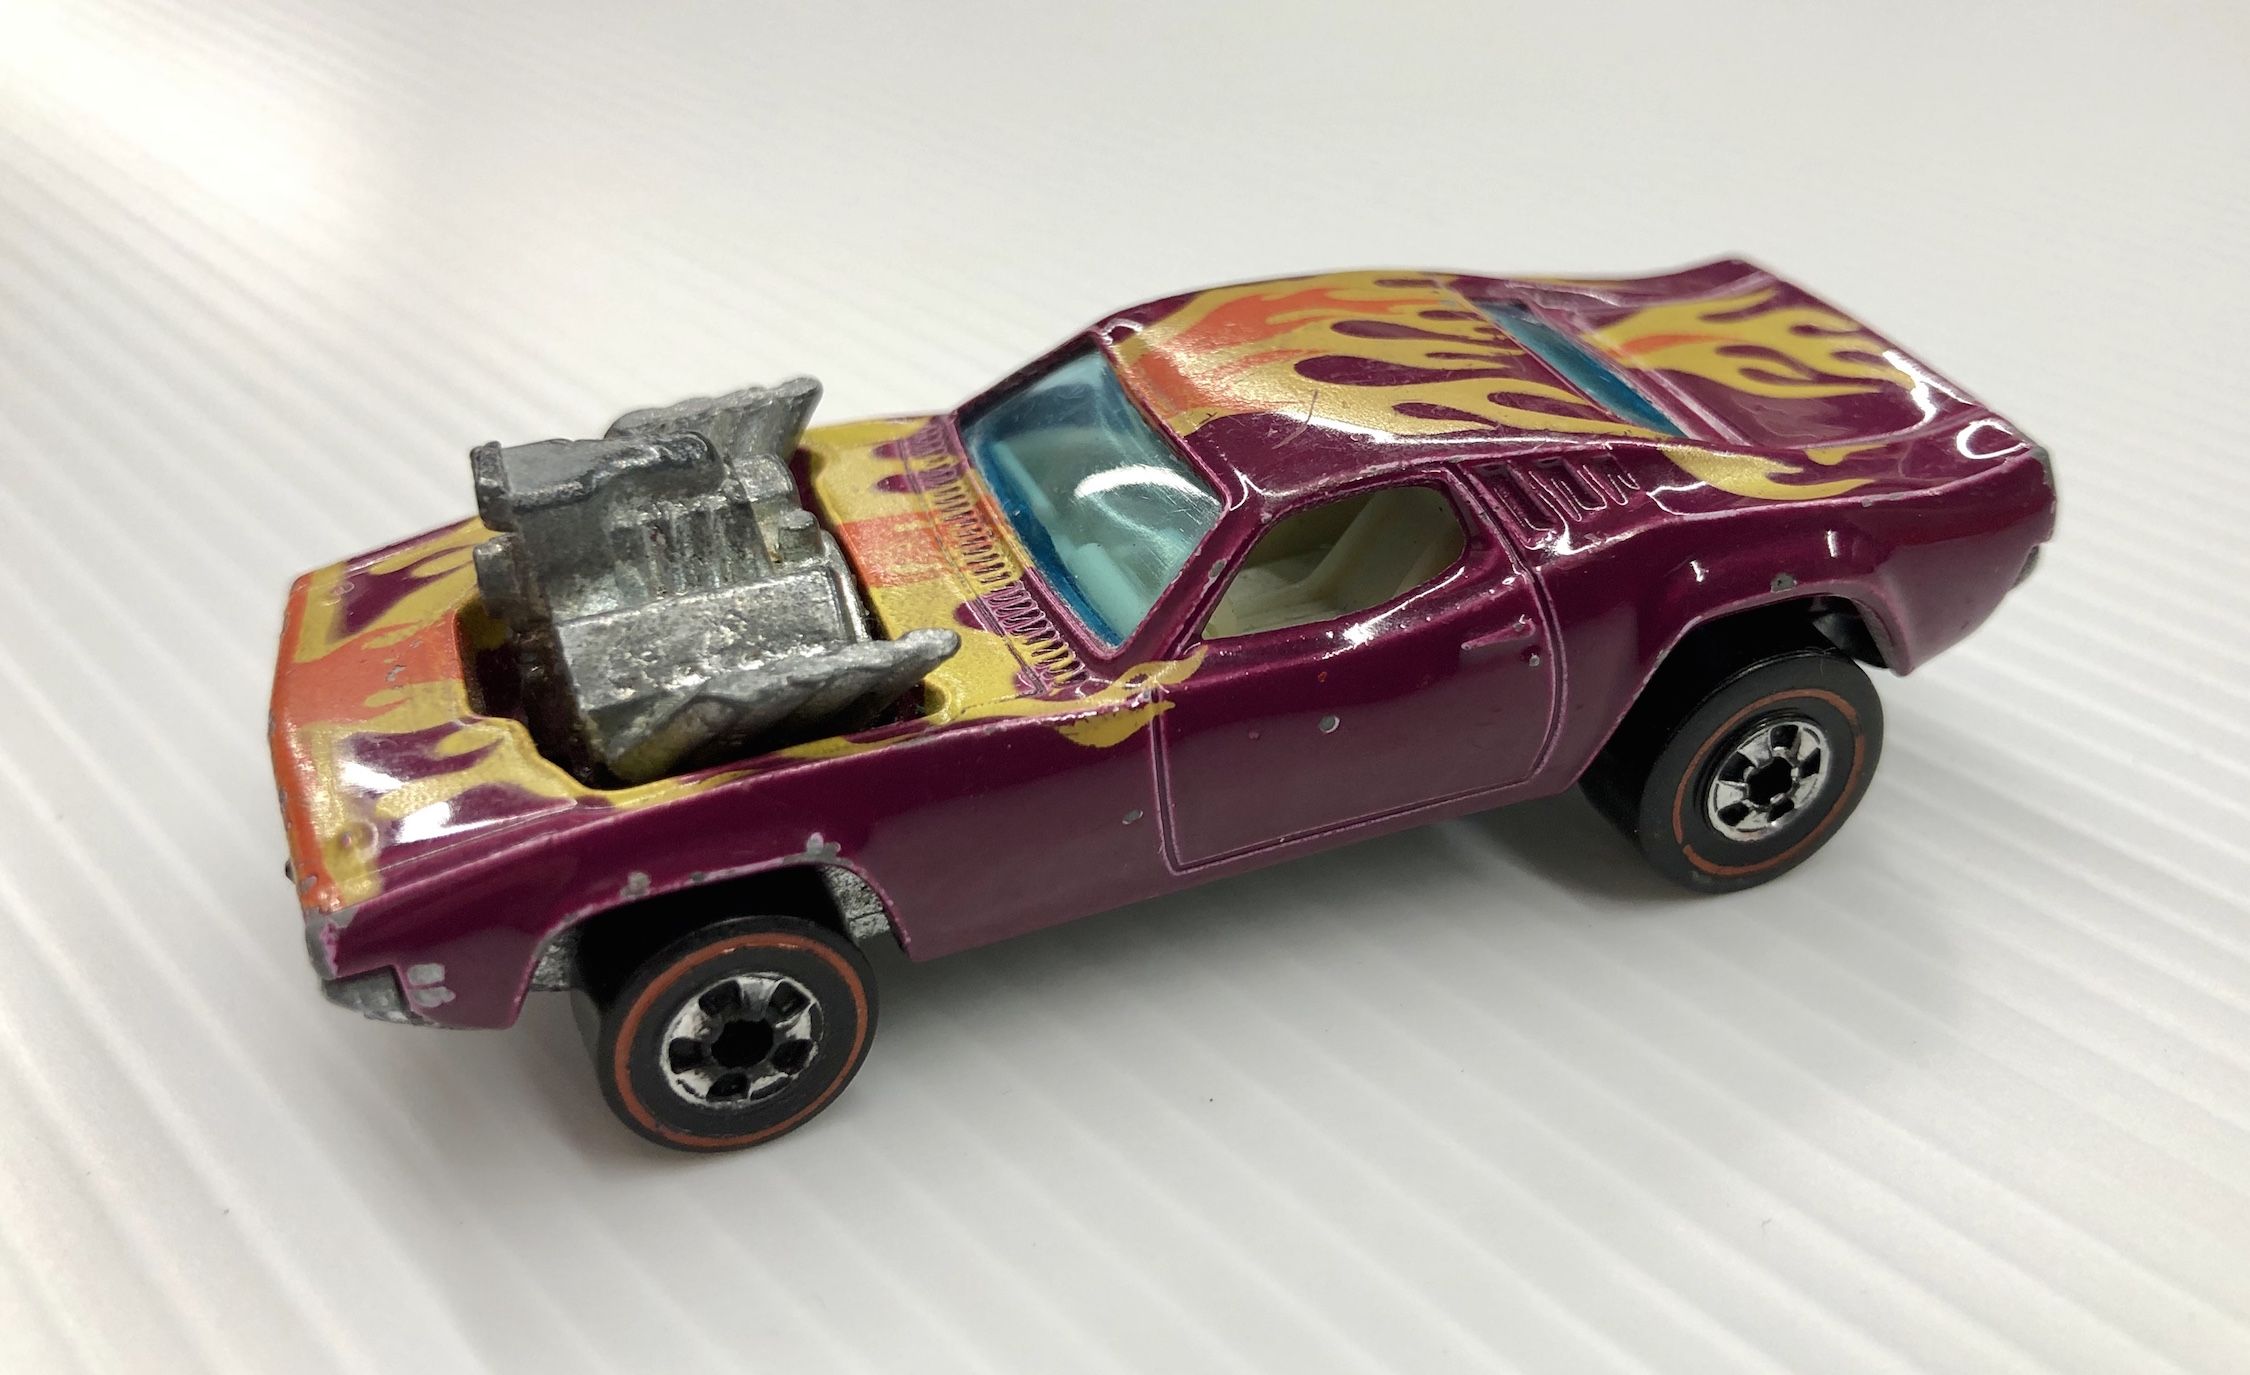 first hot wheels car ever created